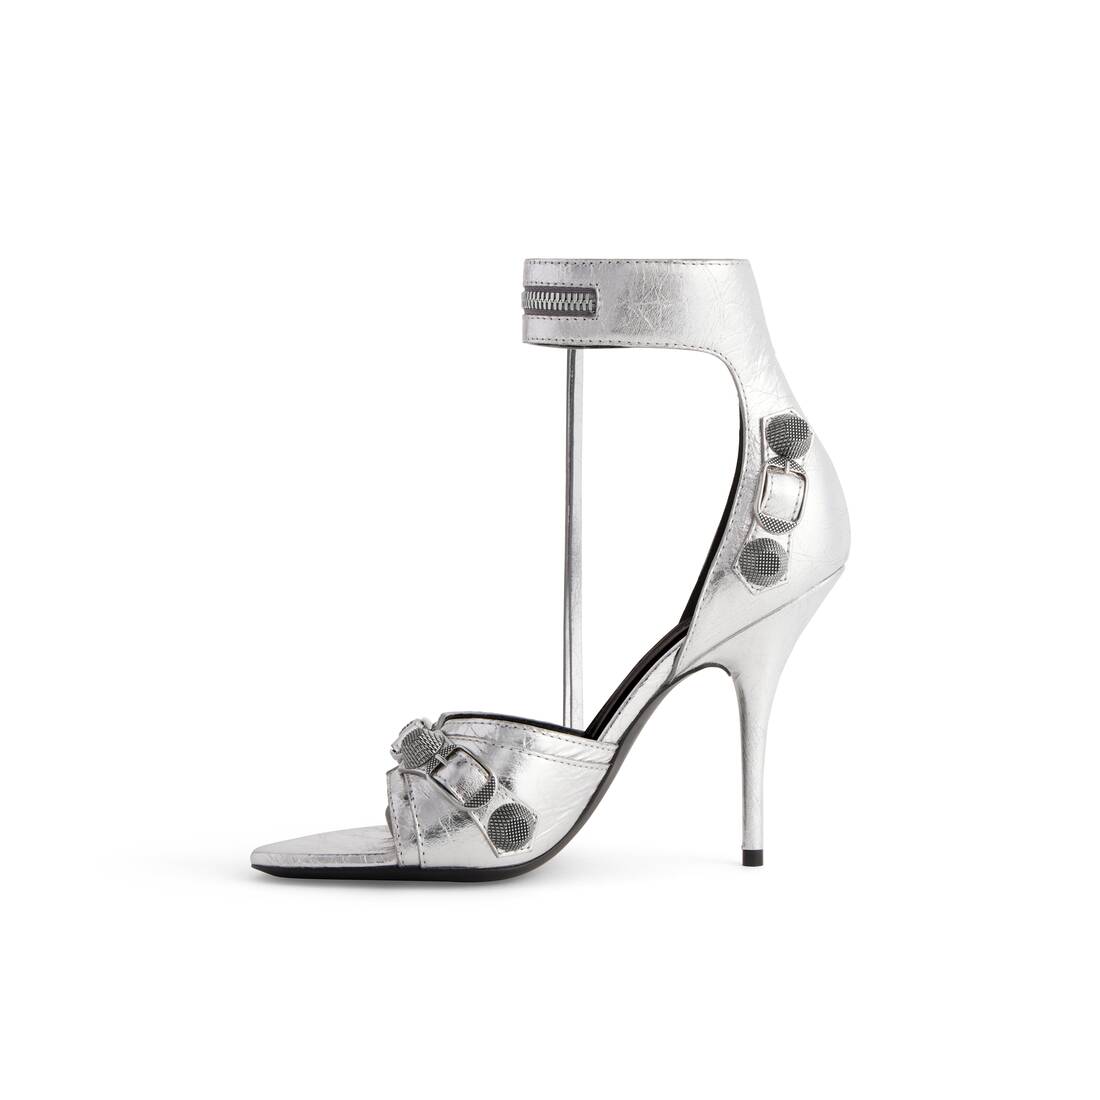 Women's Cagole 110mm Sandal Metallized in Silver